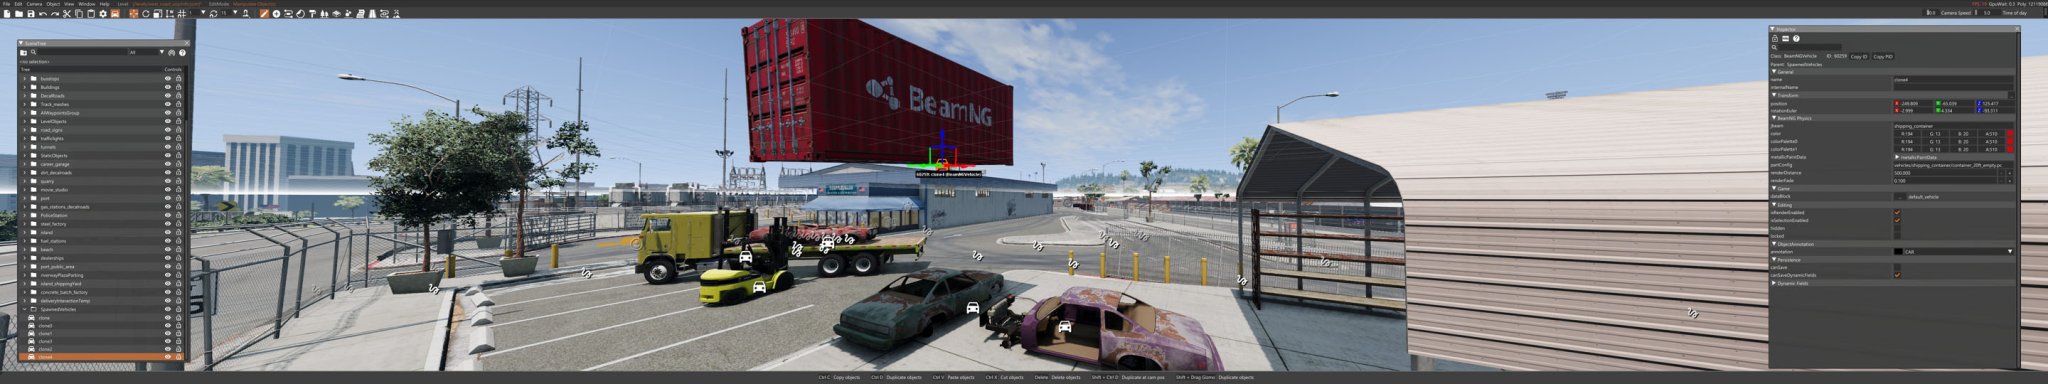 3 BeamNG CRUSHED CARS to HOT ROLLED Inc STEEL copy.jpg